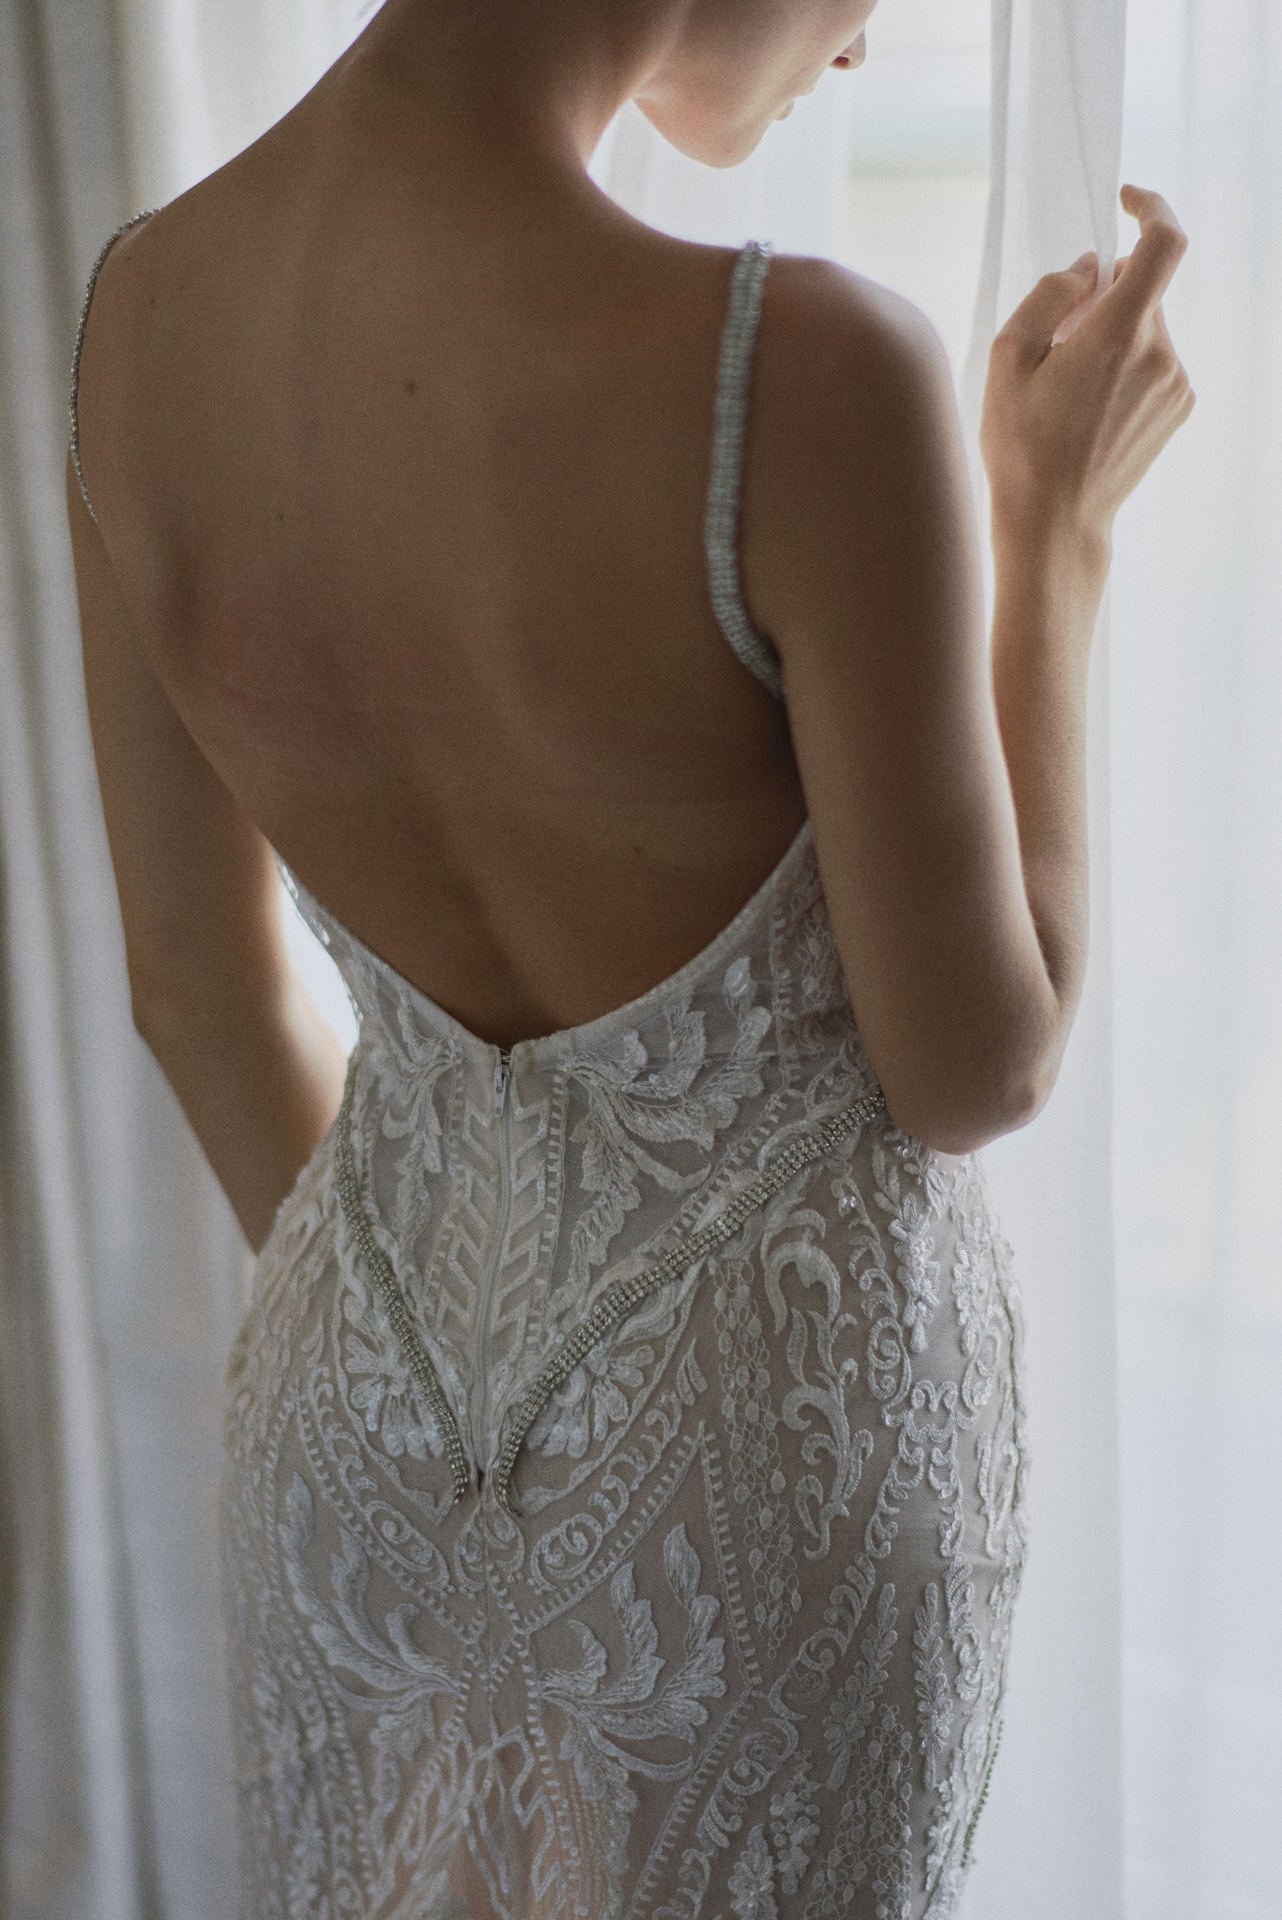 Backless wedding gown, lace embroidery